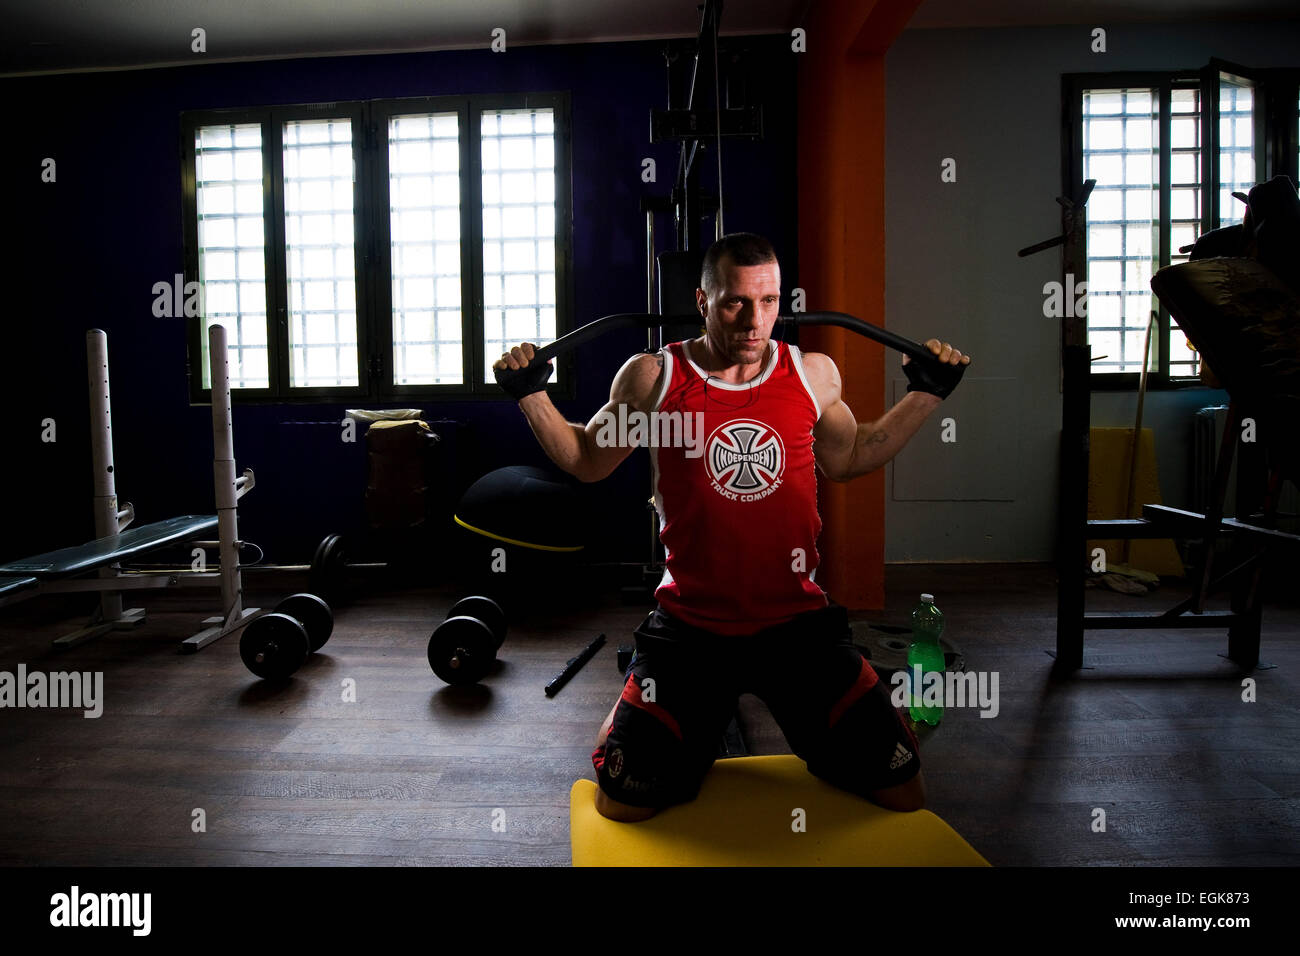 Italy, Bollate prison, Physical activity in the gym Stock Photo